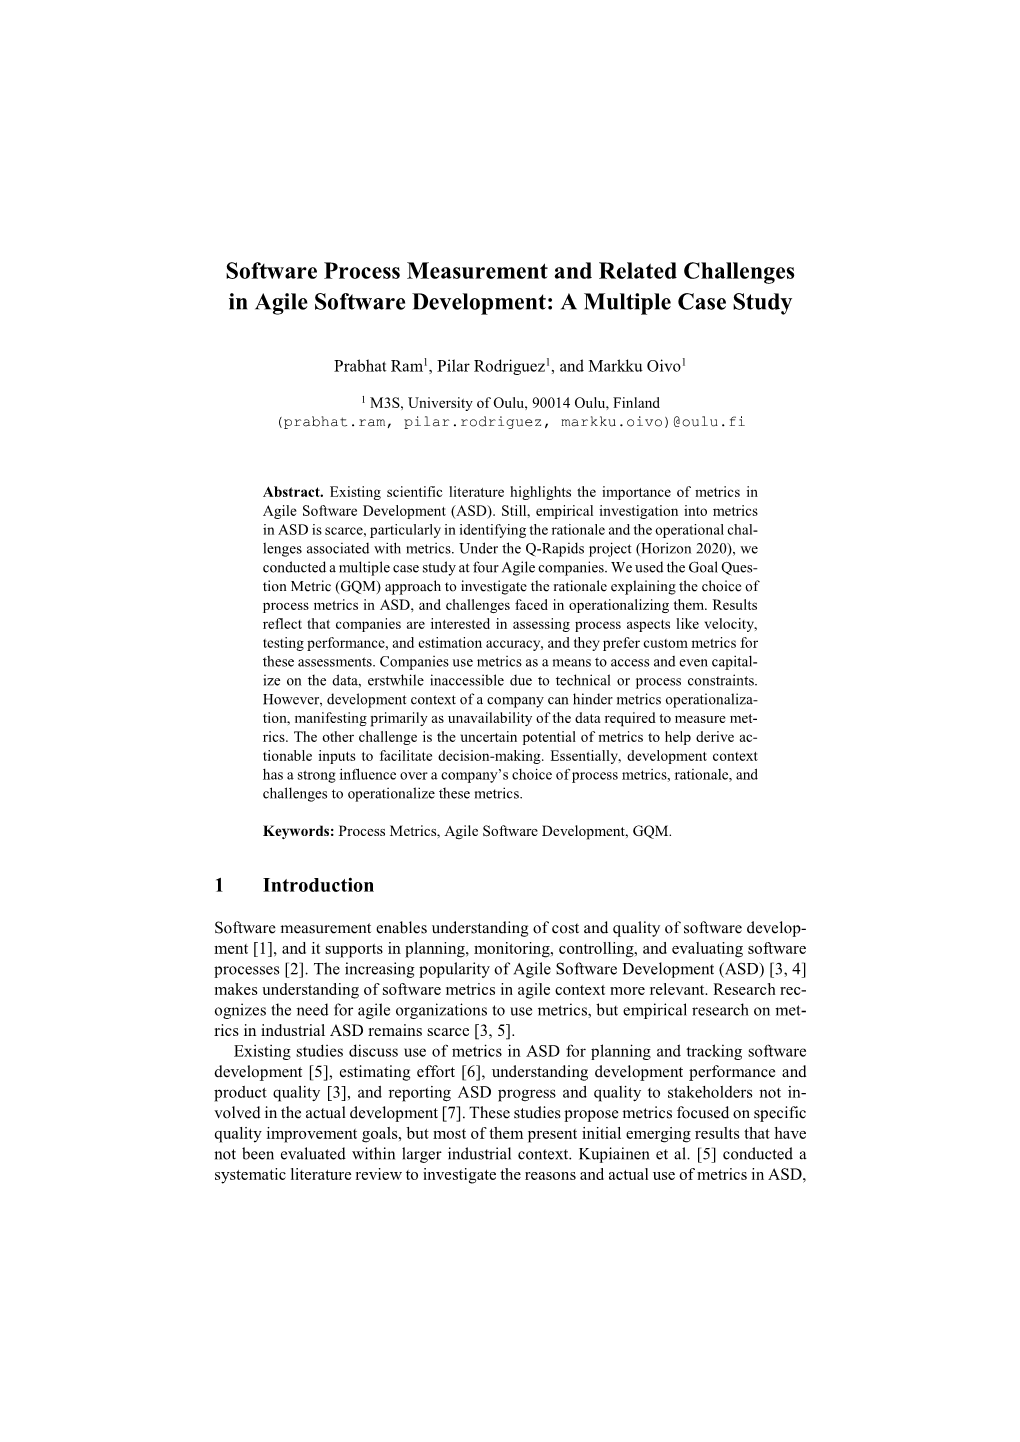 Software Process Measurement and Related Challenges in Agile Software Development: a Multiple Case Study